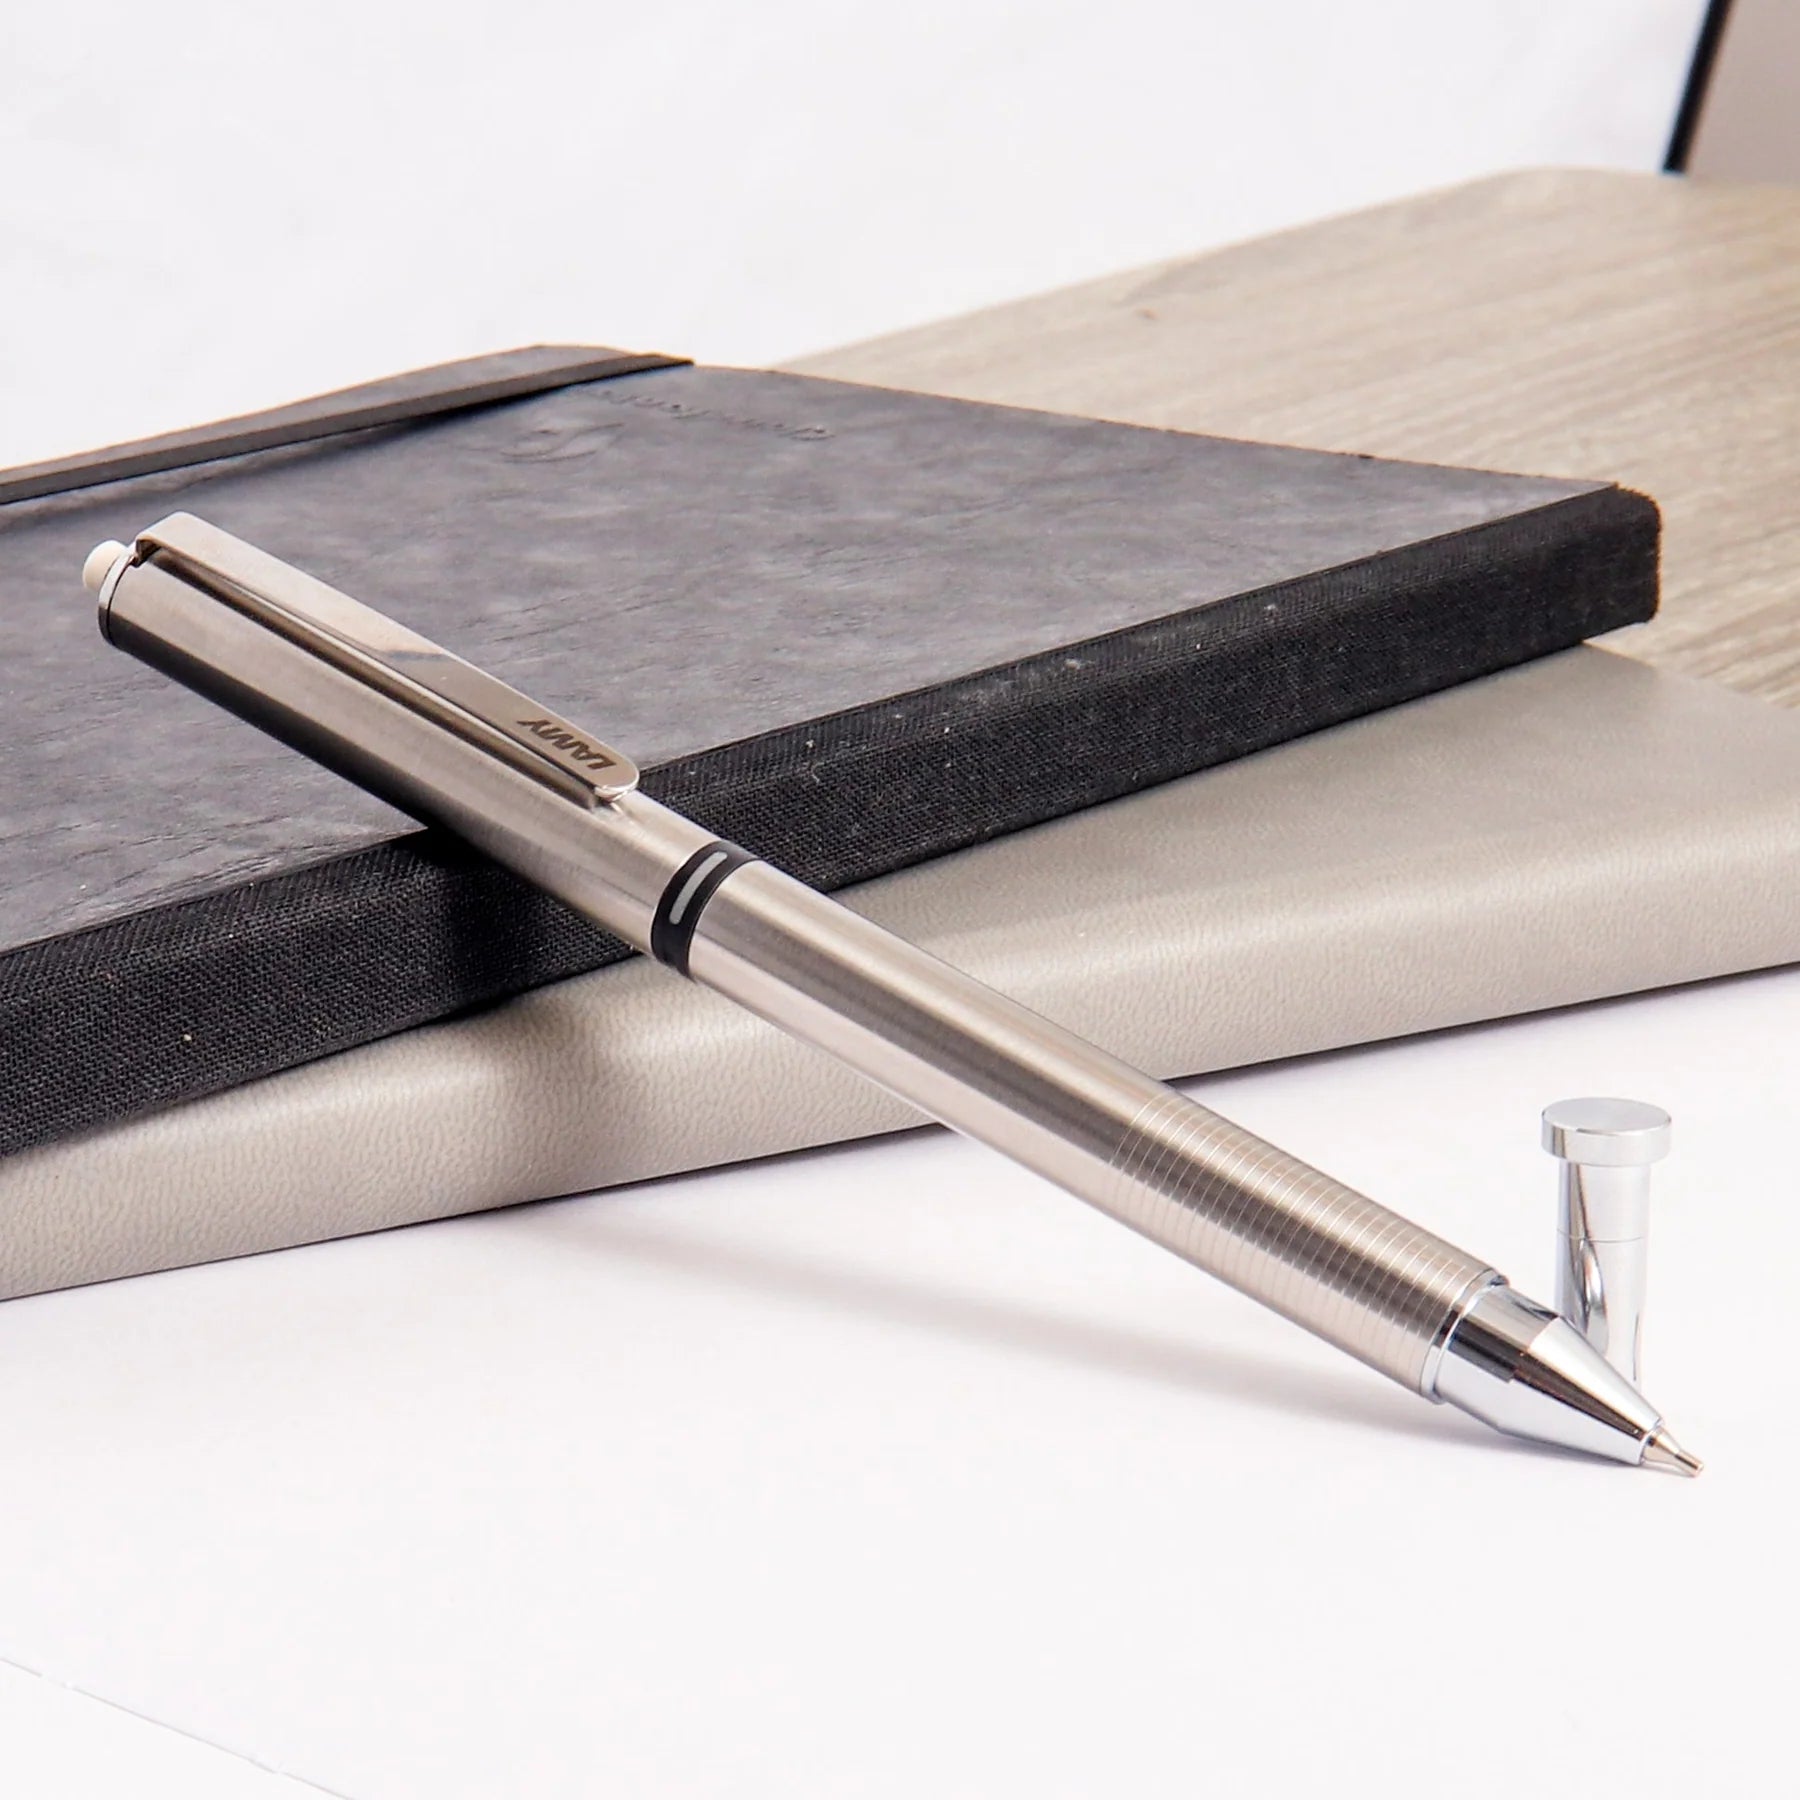 Finding the Perfect Pen for Journaling: A Writer's Companion